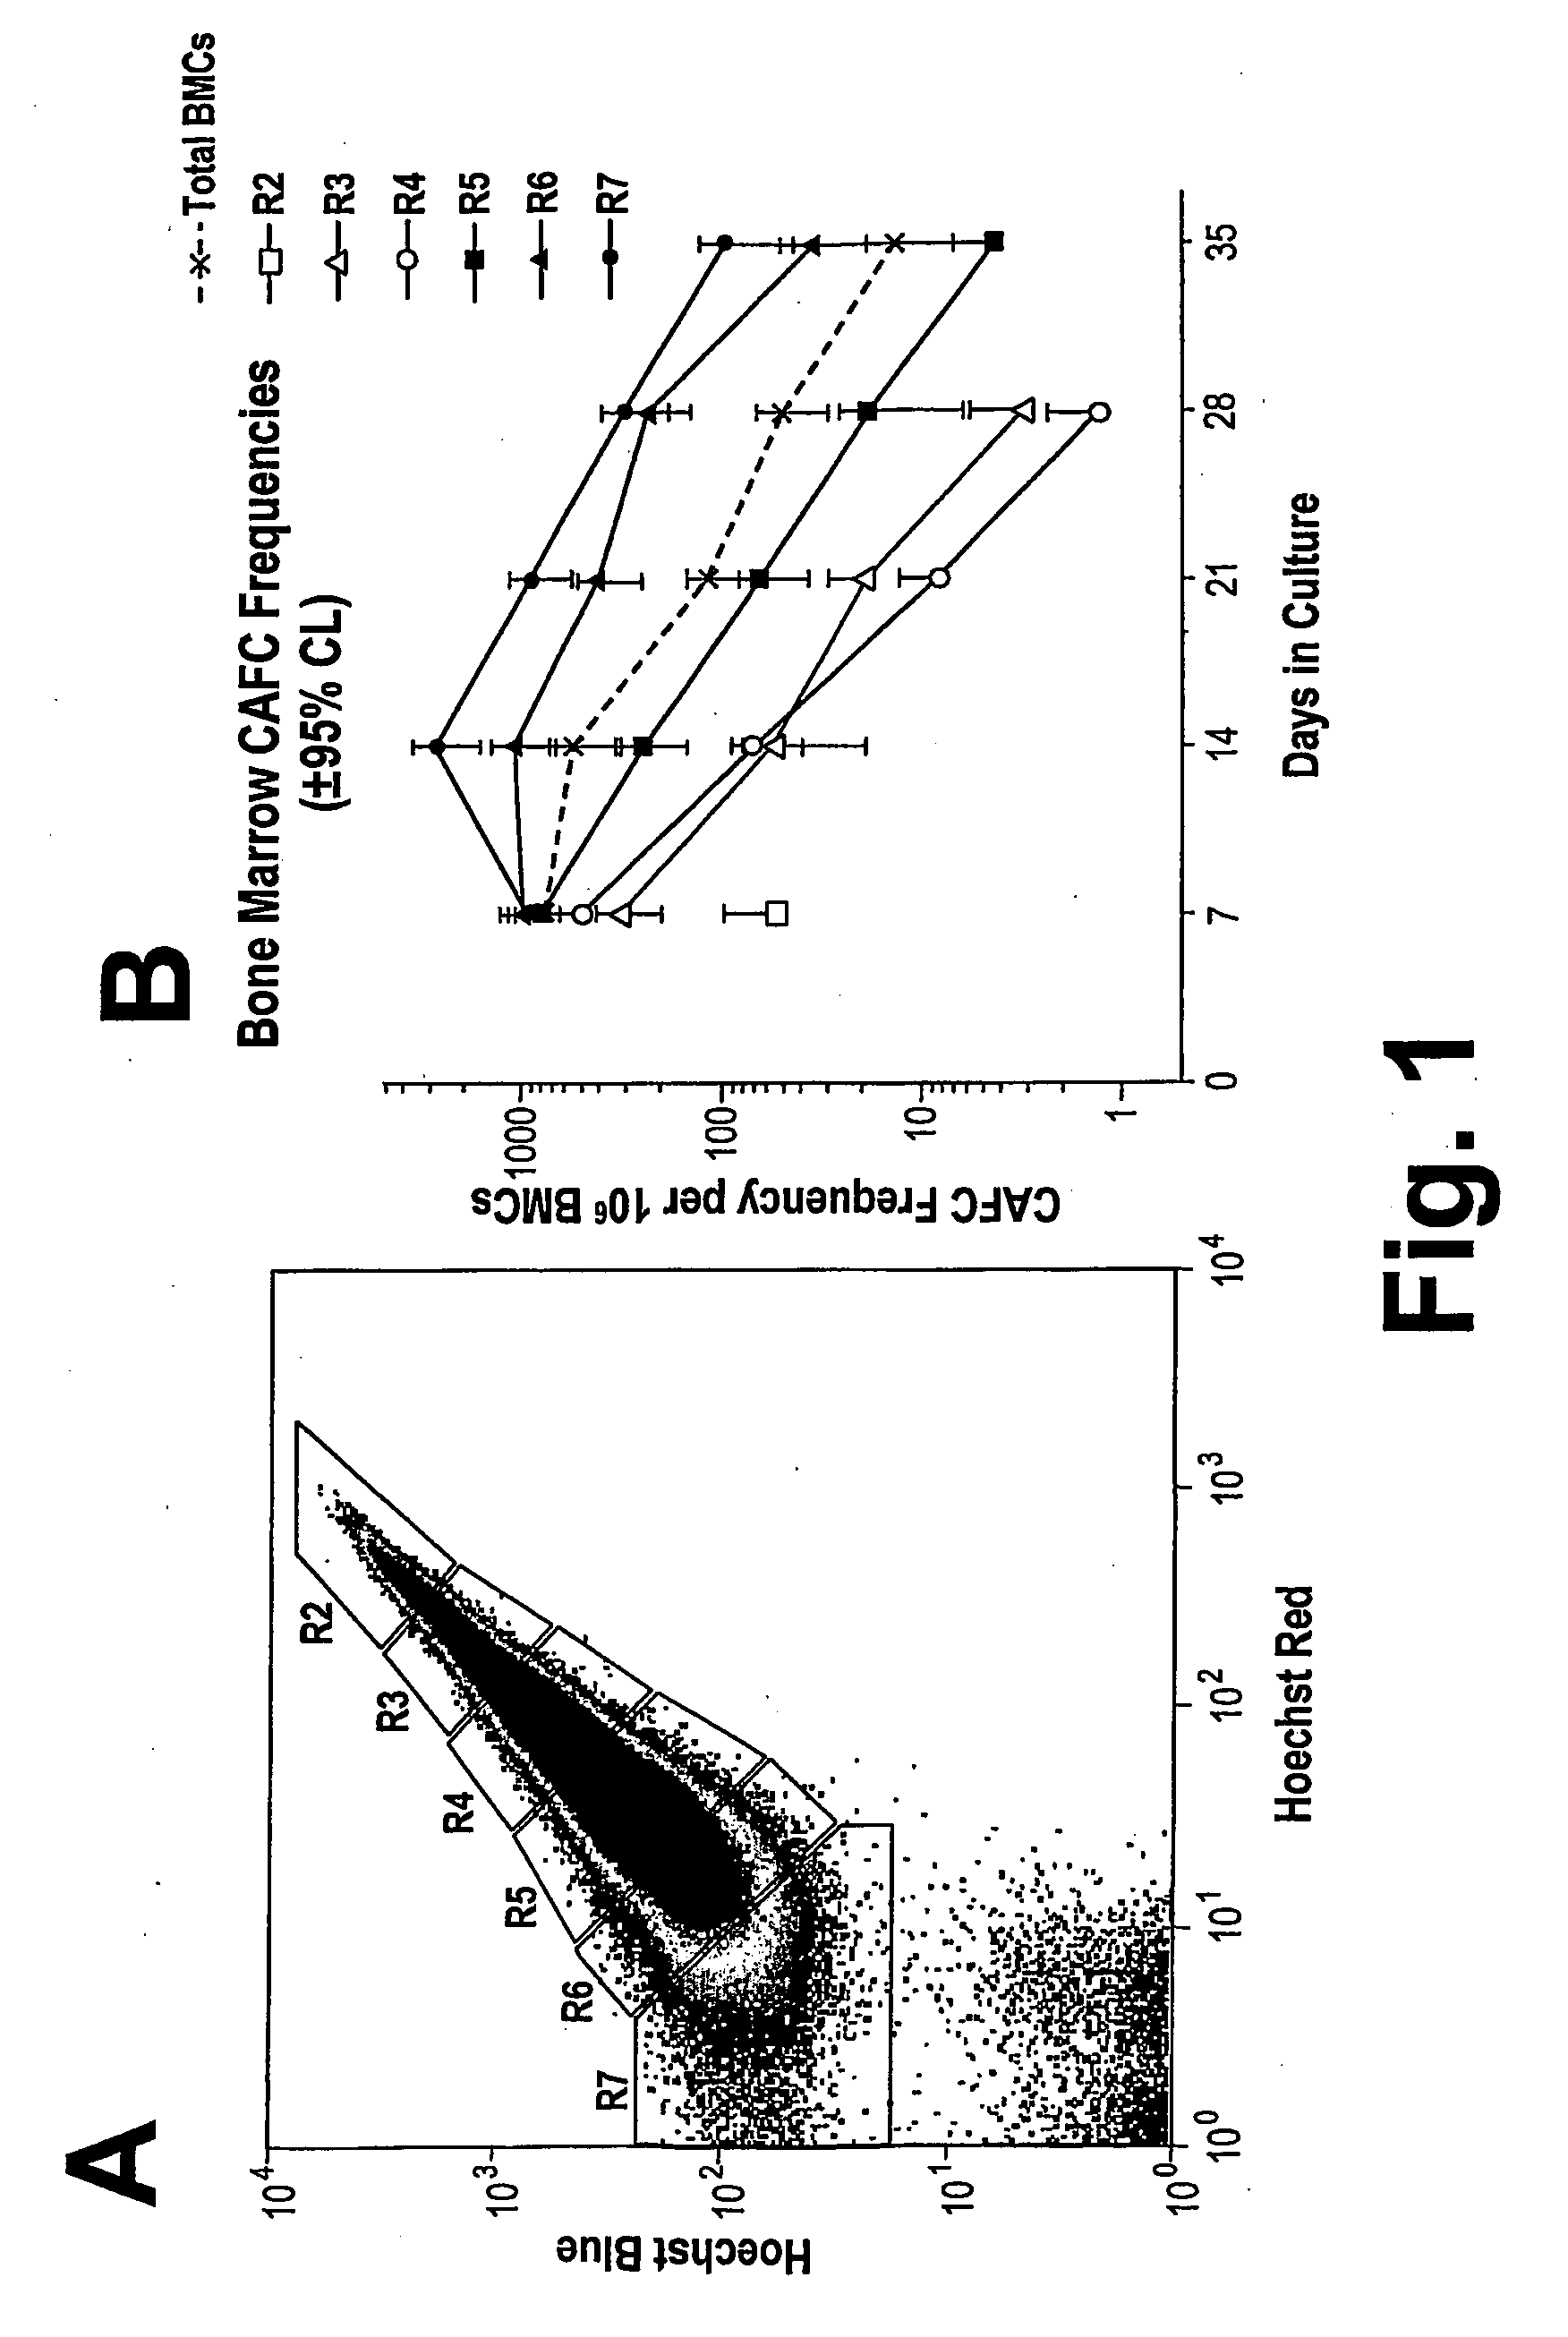 Method for Selectively Depleting Hypoxic Cells